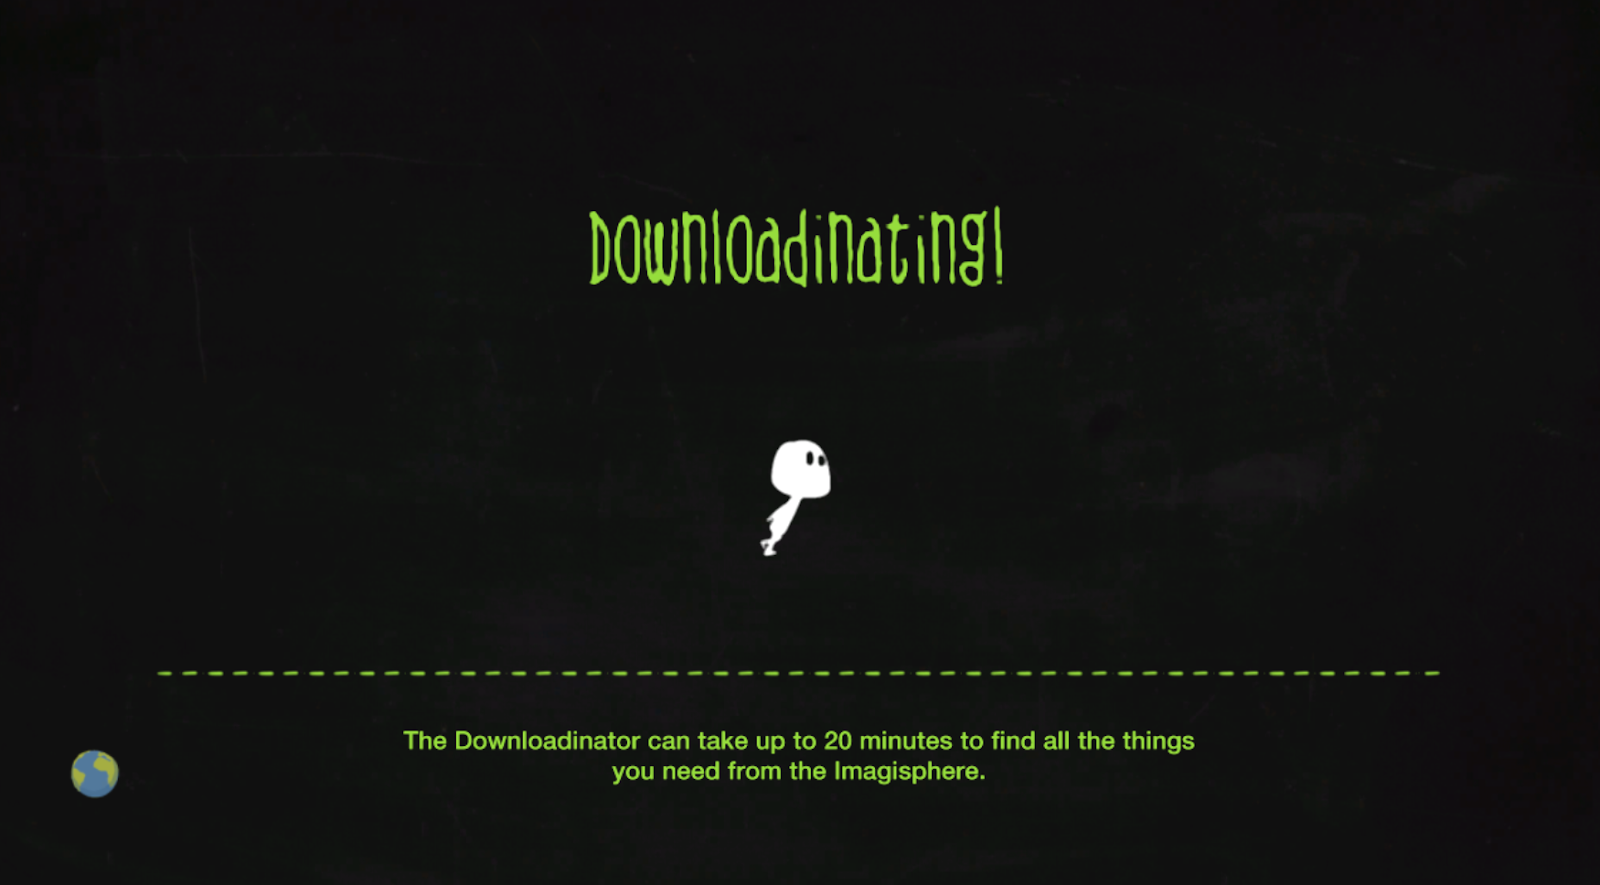 Downloadinating the downloadinator can take up to 20 minutes to find all the things you need from the Imagisphere